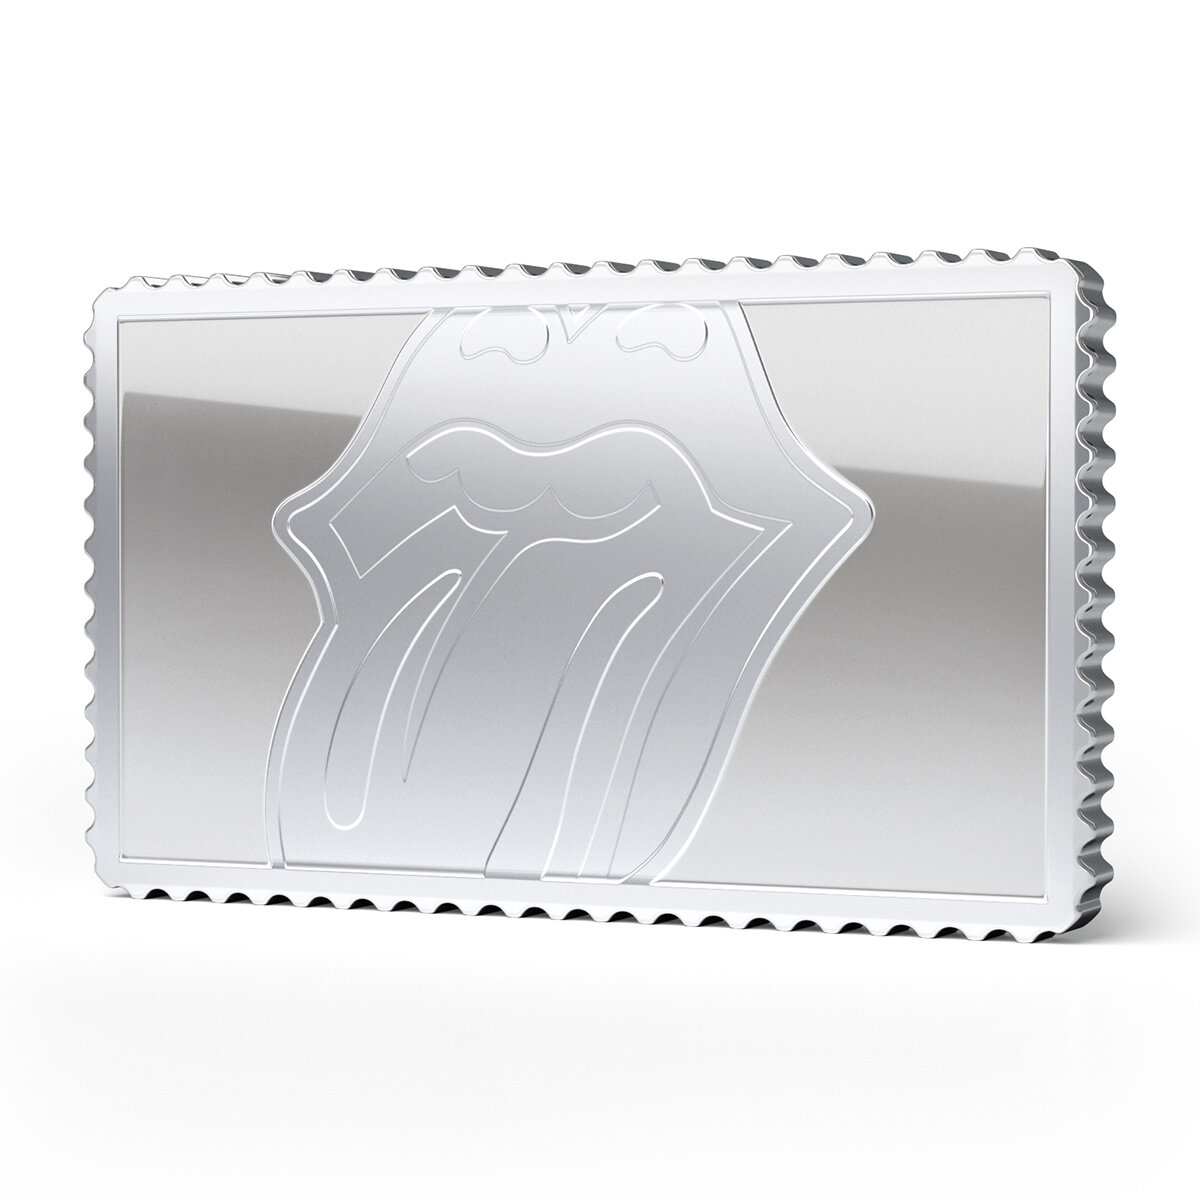 Buy The Rolling Stones Silver Stamp Ingot RM Box Image at Costco.co.uk